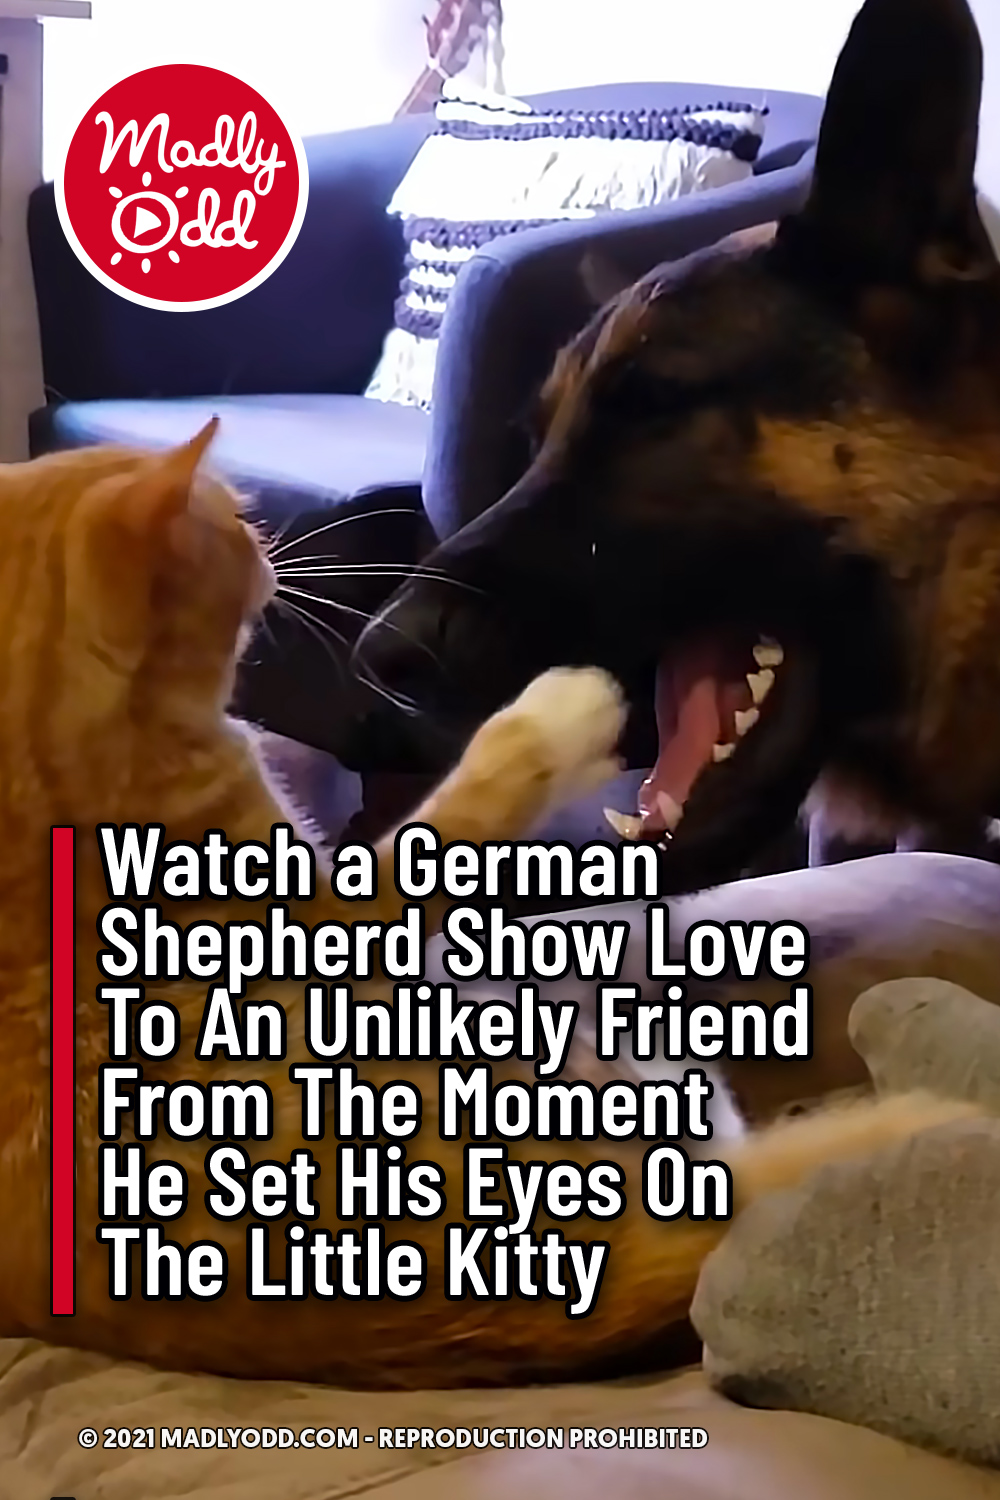 Watch a German Shepherd Show Love To An Unlikely Friend From The Moment He Set His Eyes On The Little Kitty